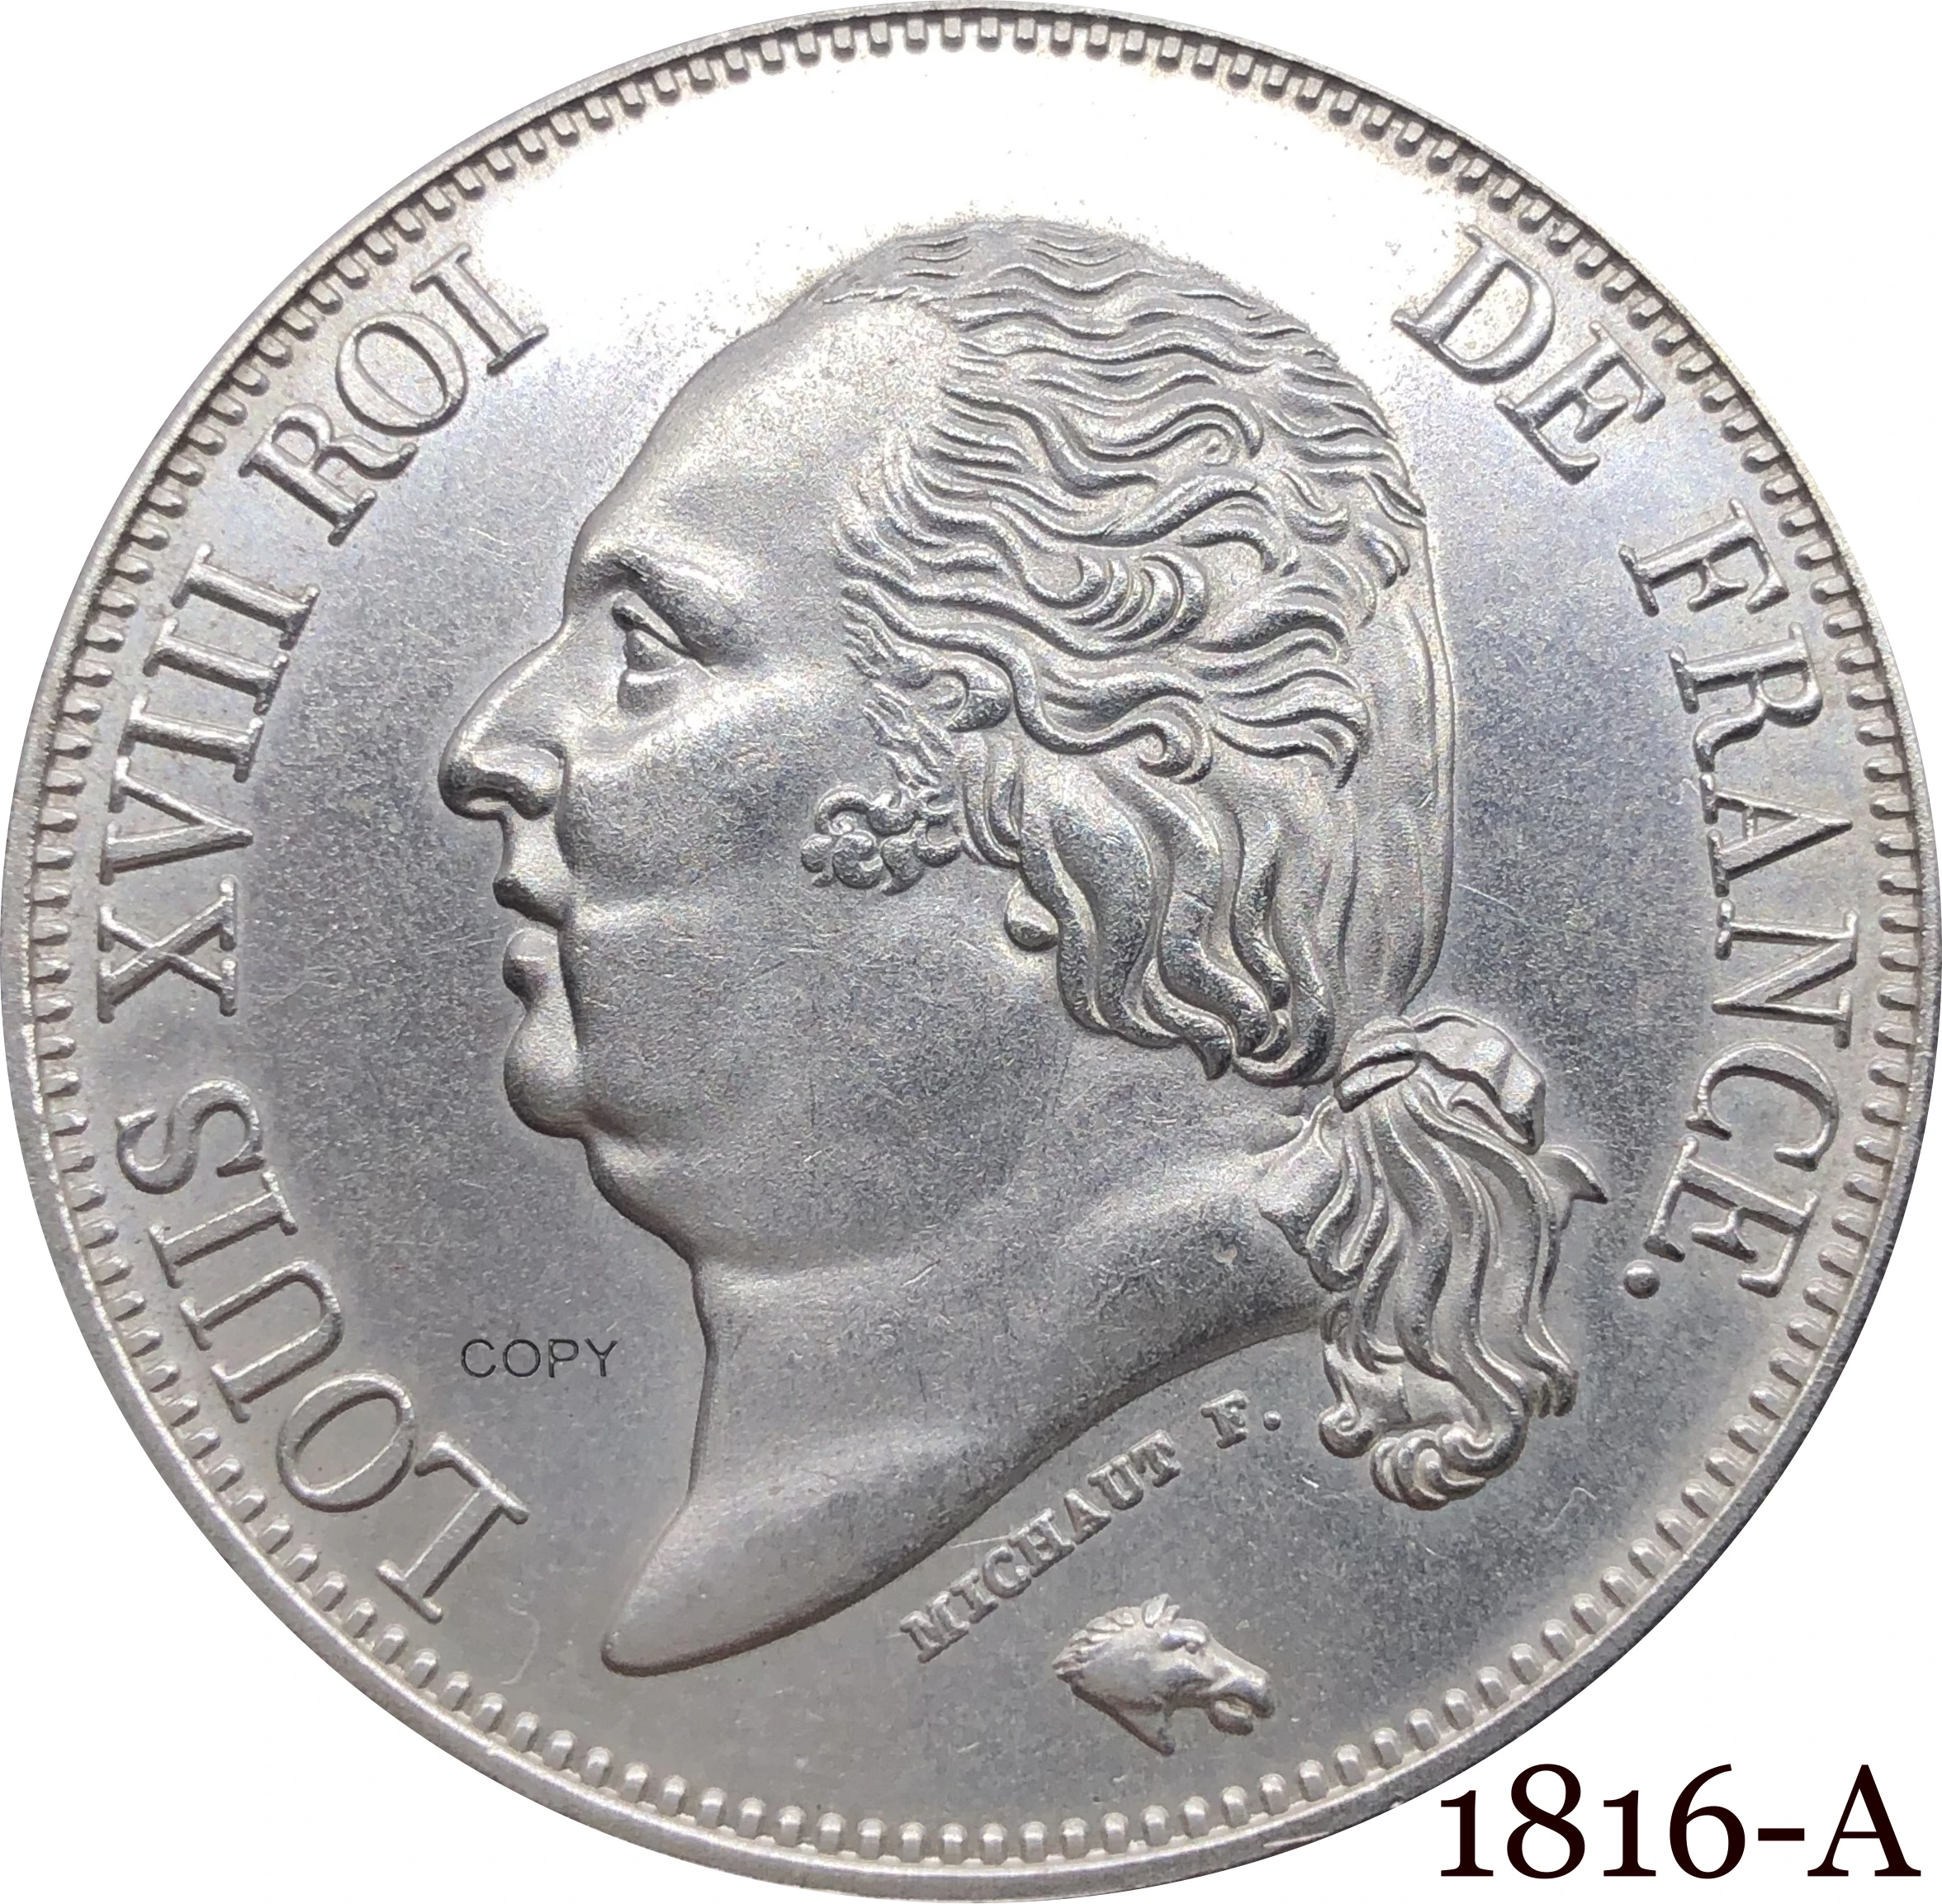 

France 1816 A 5 Francs - Louis XVIII Bare Head Coin Metal Cupronickel Plated Silver Collectible Souvenir Copy Coins